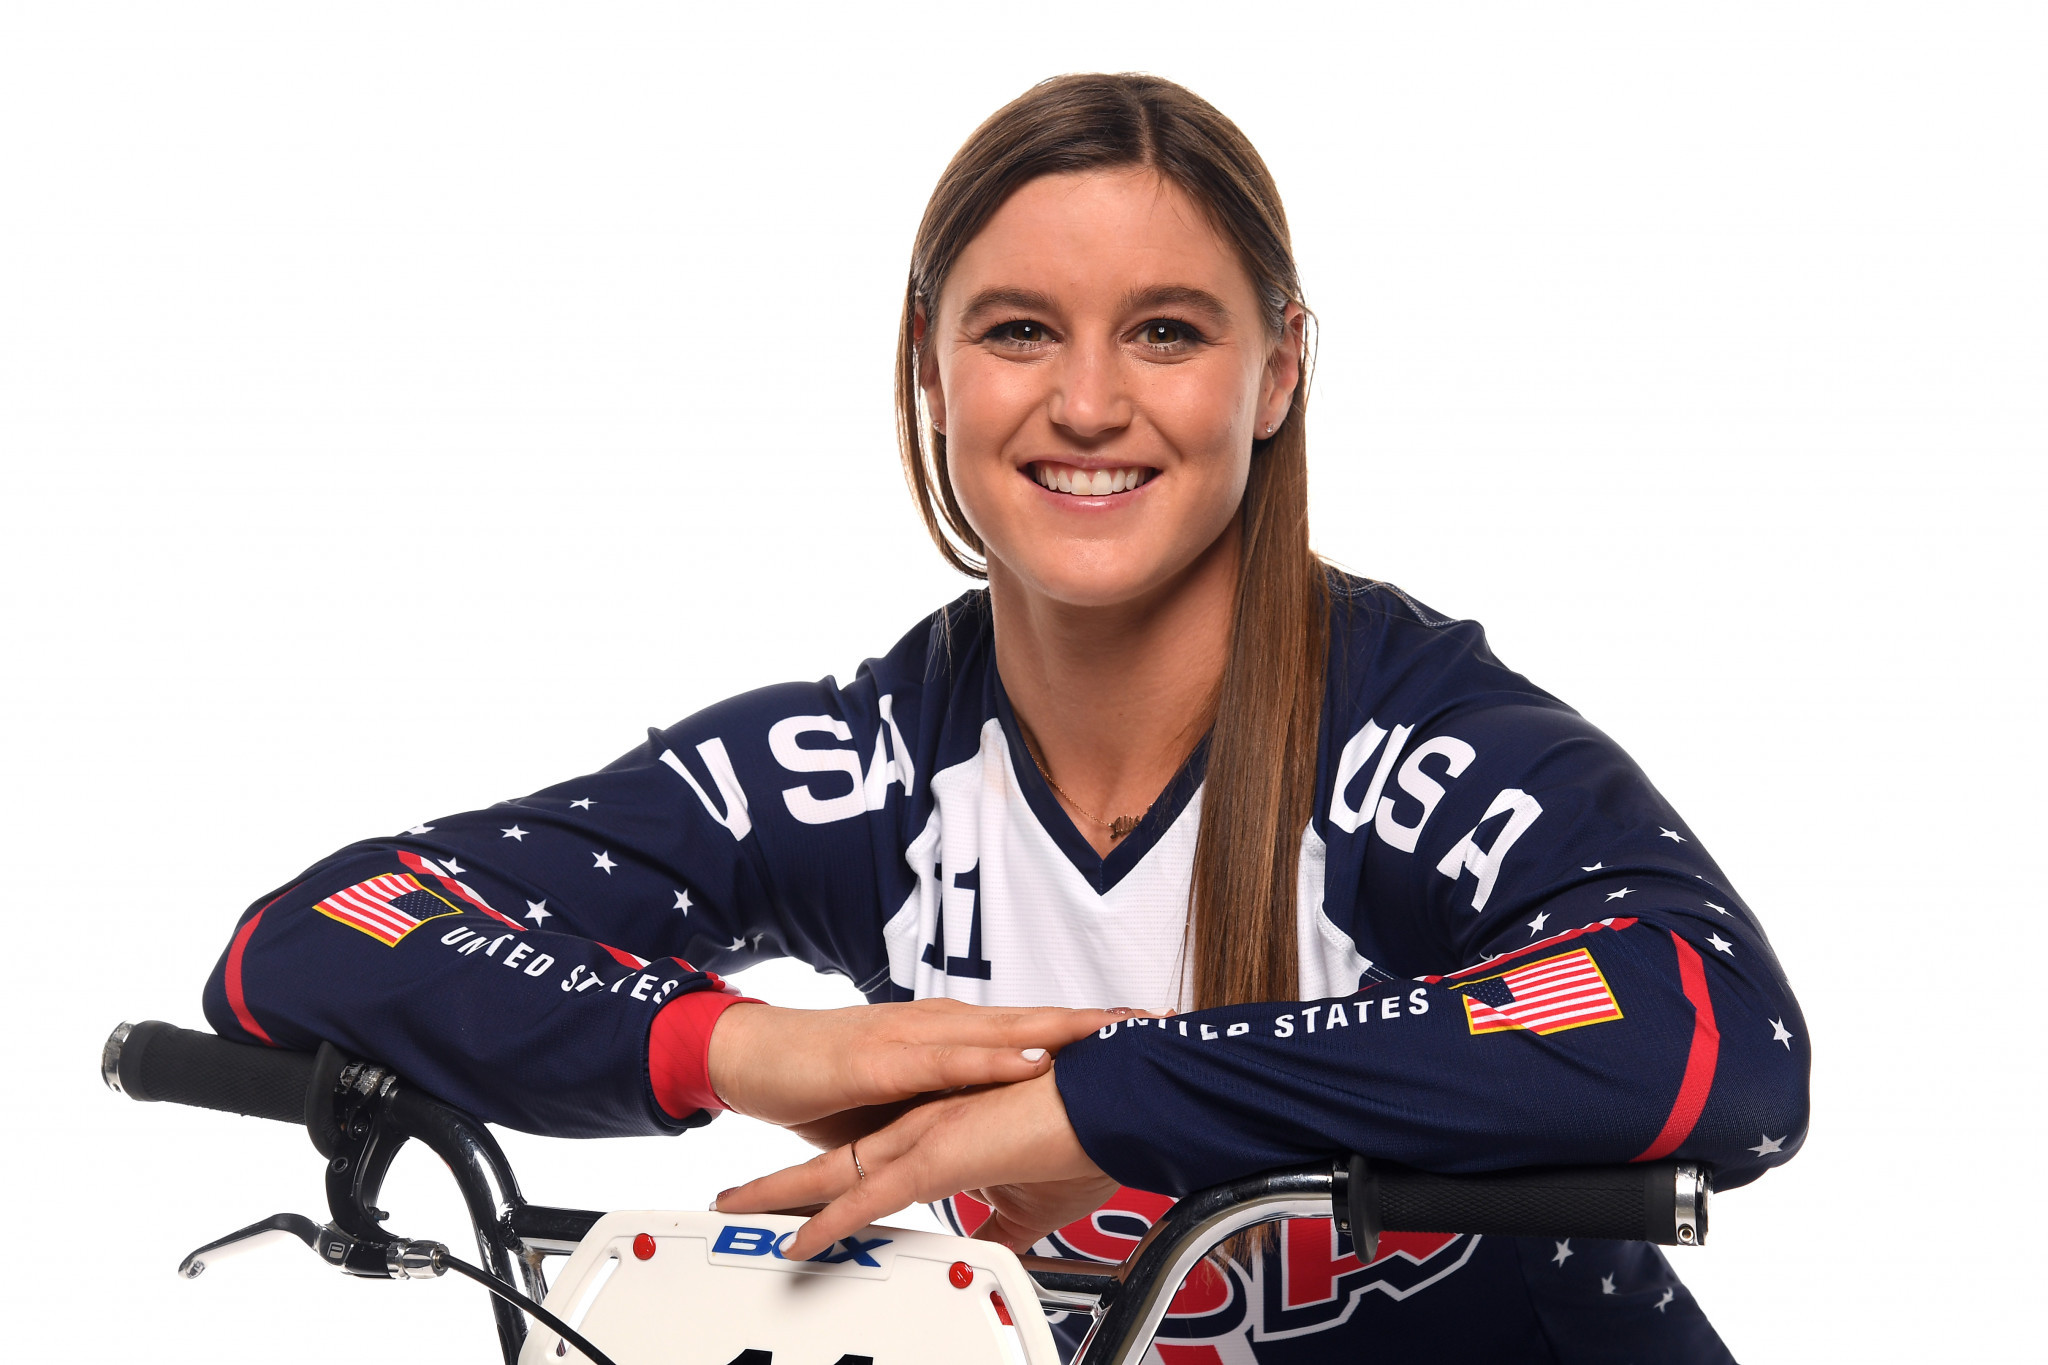 Willoughby aims for third win as UCI BMX Supercross World Cup goes to Bathurst